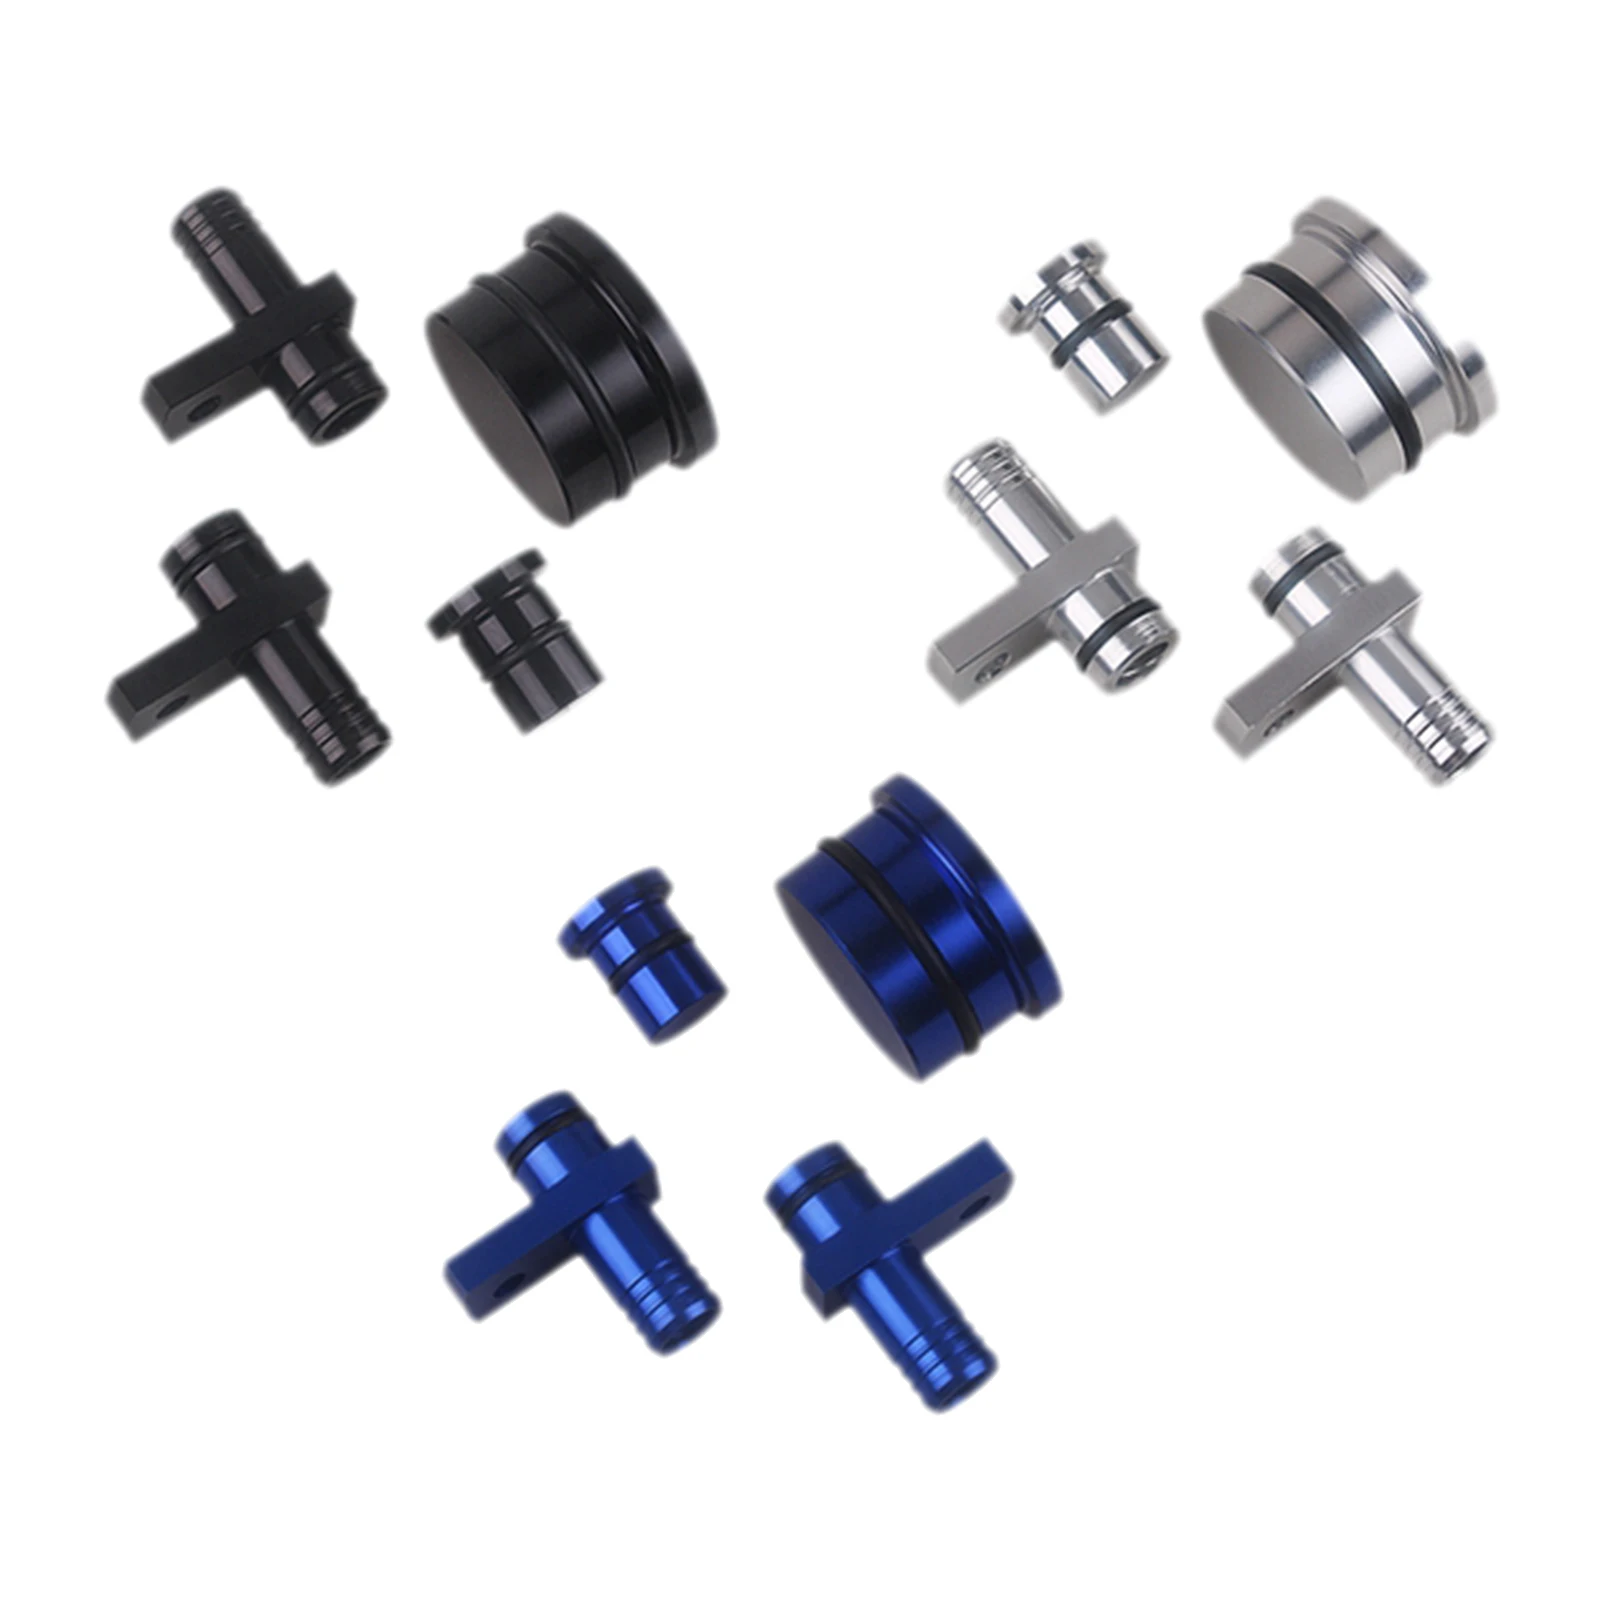 PCV Reroute Fitting Resonator Plug Reroute Assembly Kit with Upgraded For LLY LBZ LMM 6.6L